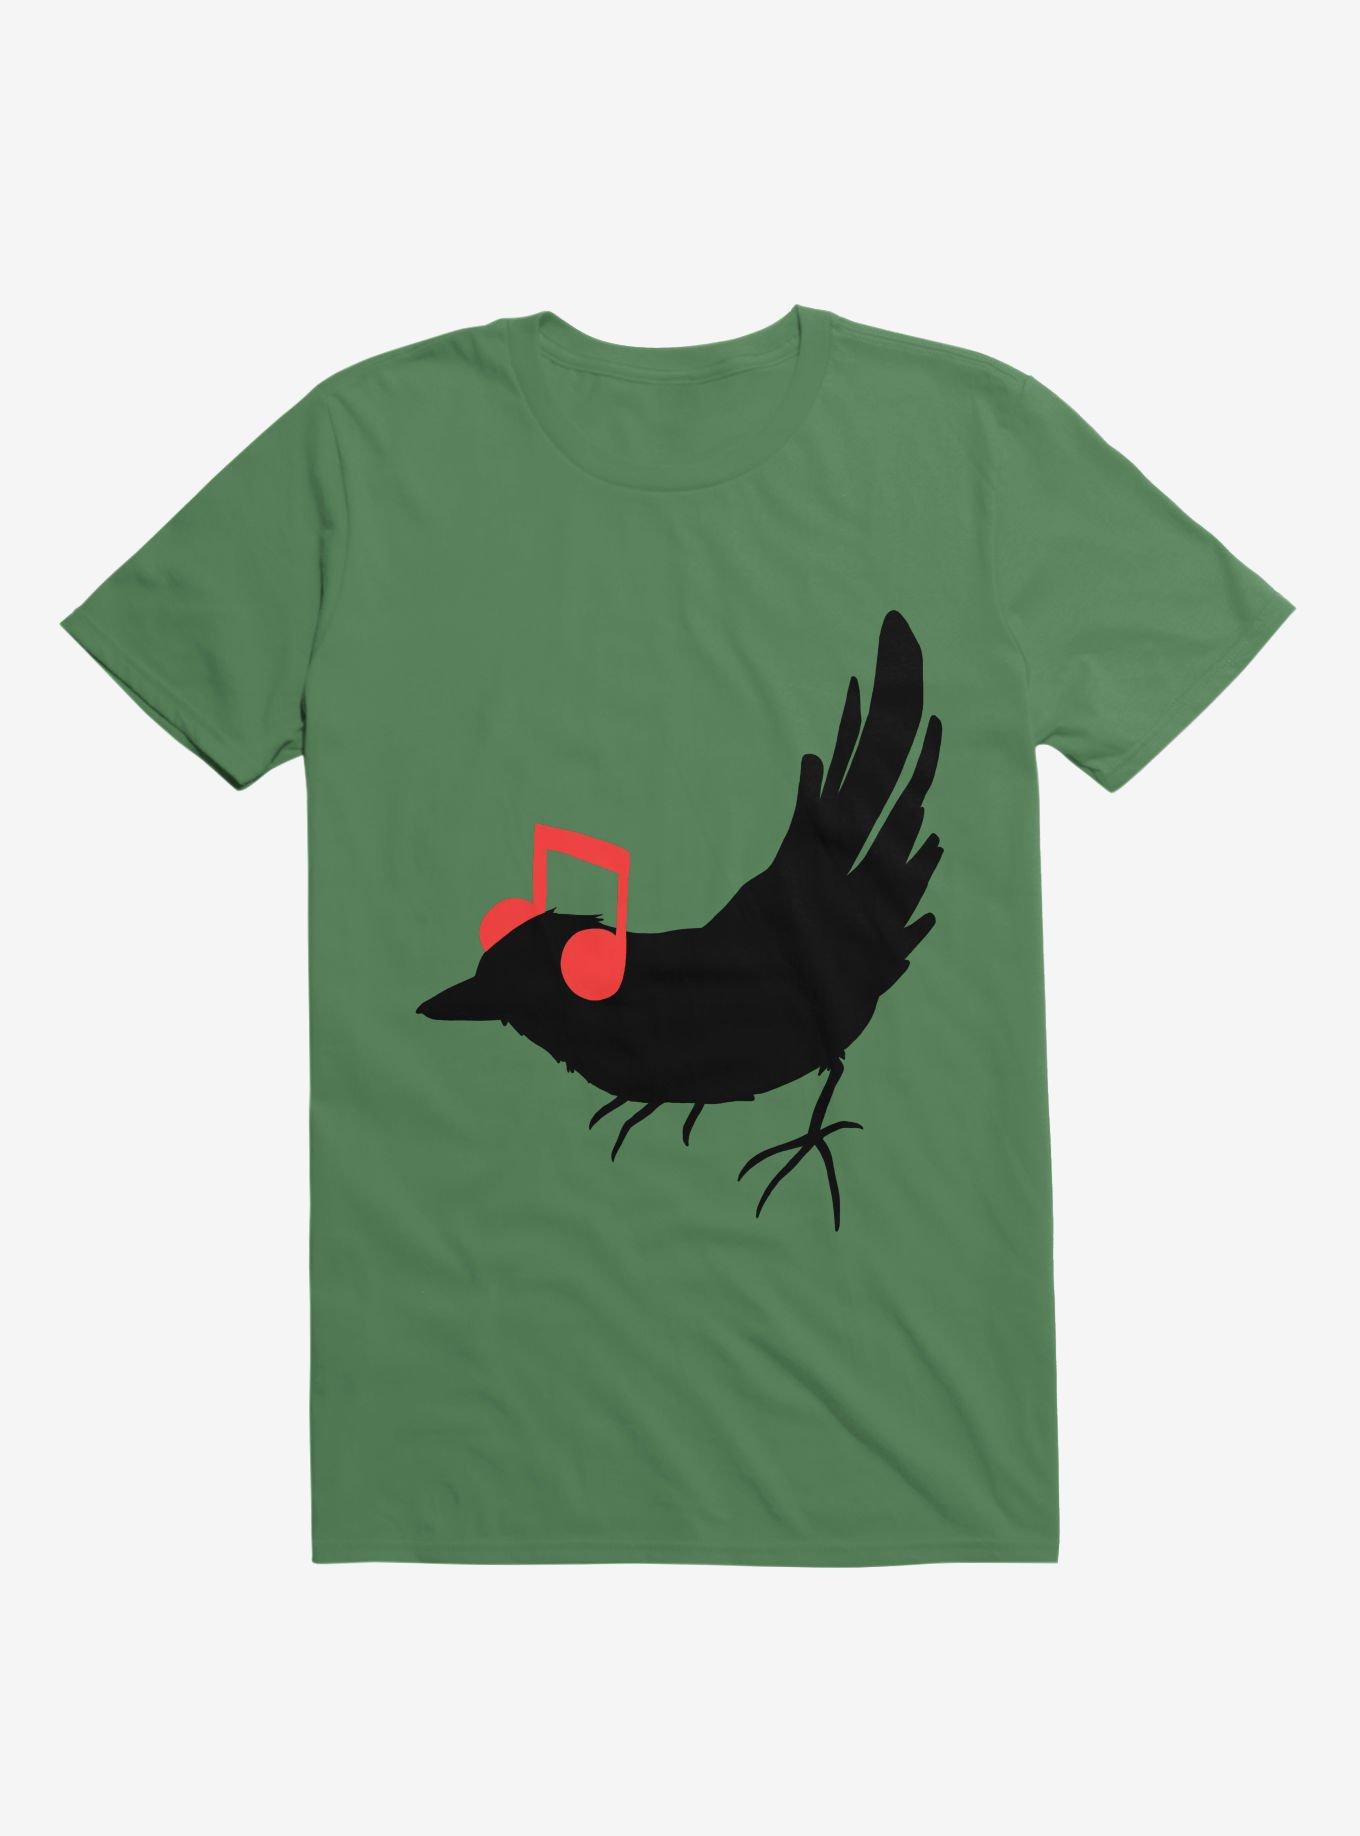 Listening To My Song T-Shirt, KELLY GREEN, hi-res